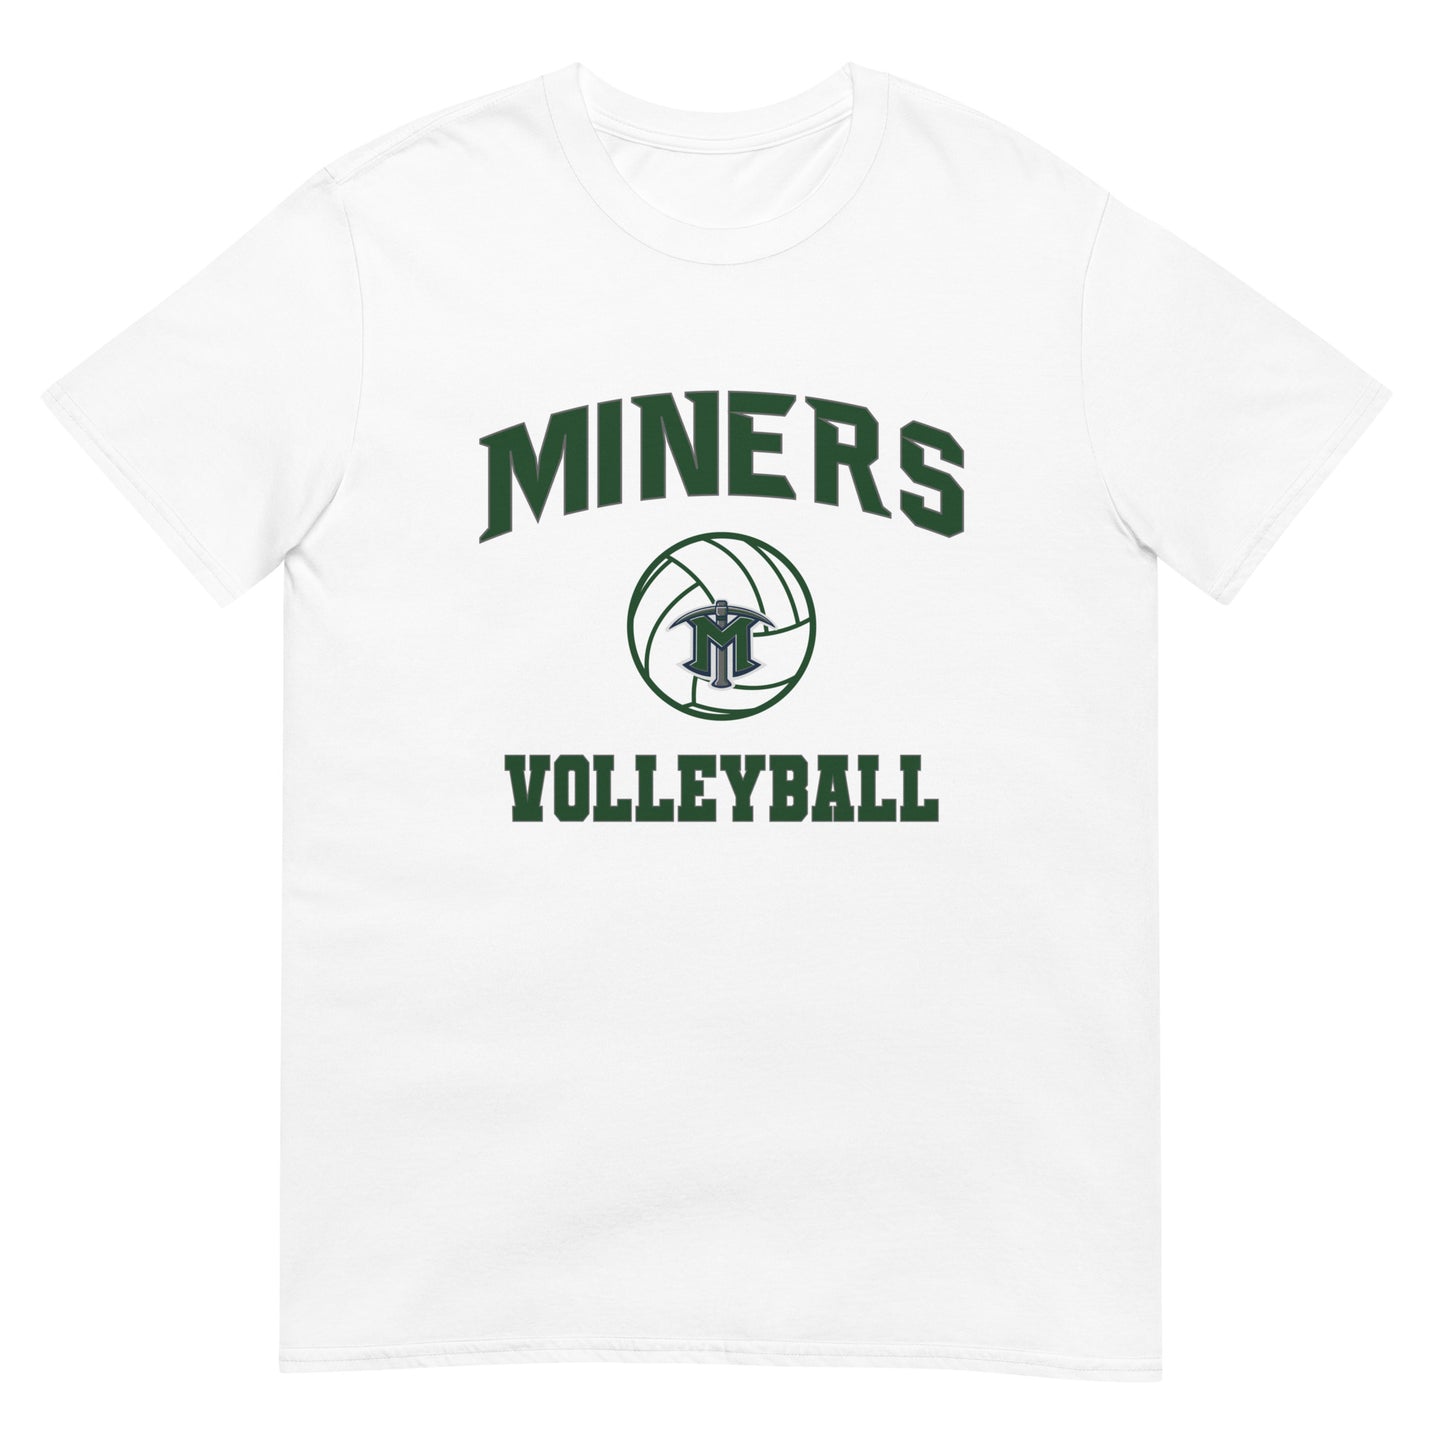 Miners Volleyball Short-Sleeve Unisex T-Shirt